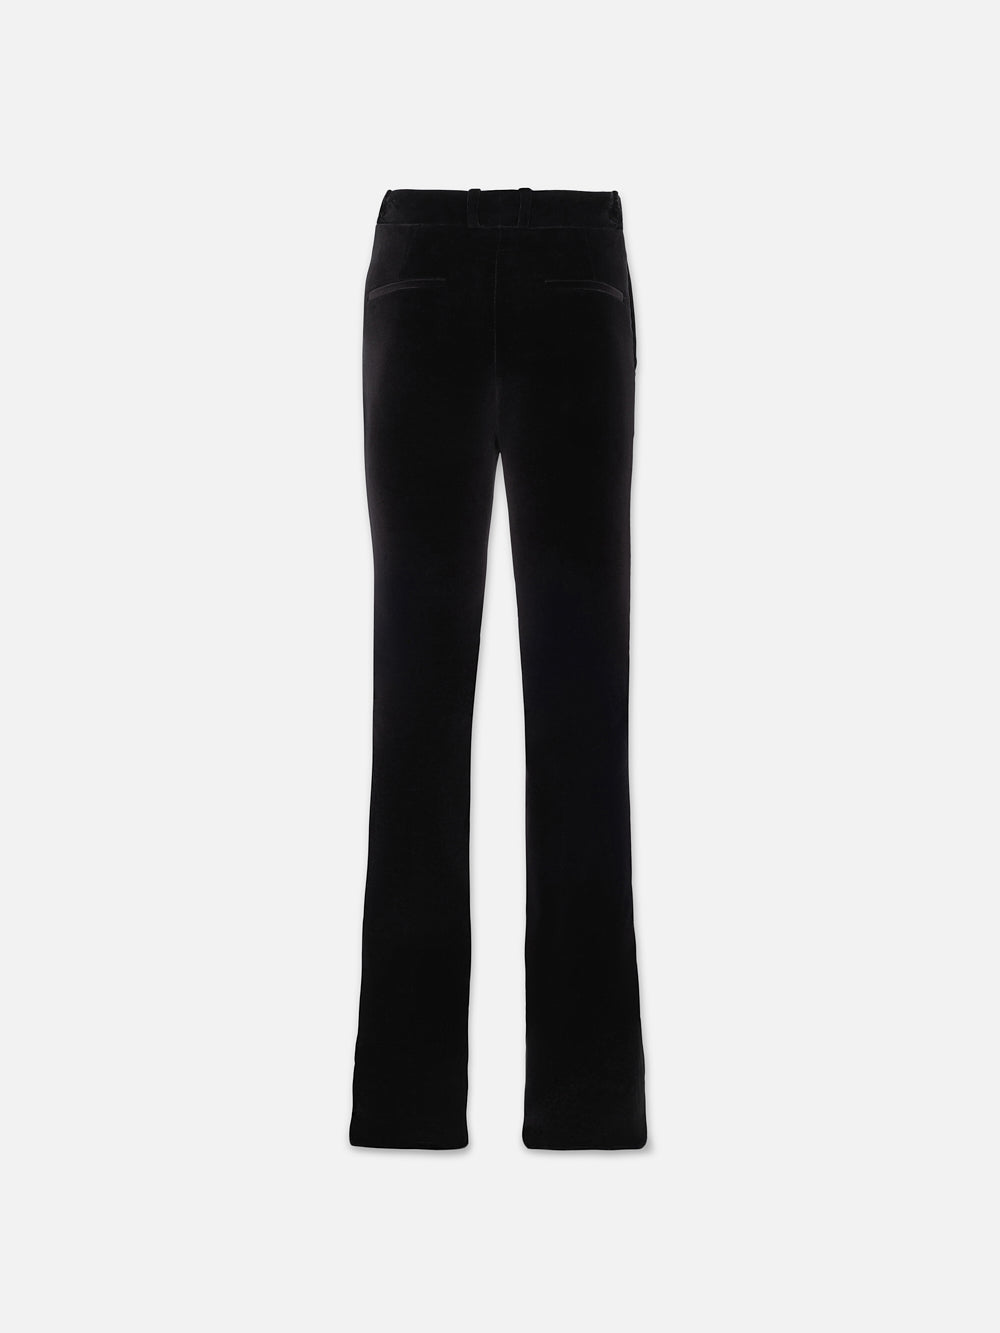 The Coolest Velvet Pants Of The Season (Le Fashion)  Velvet flare pants,  Velvet pants outfit, Velvet trousers outfit